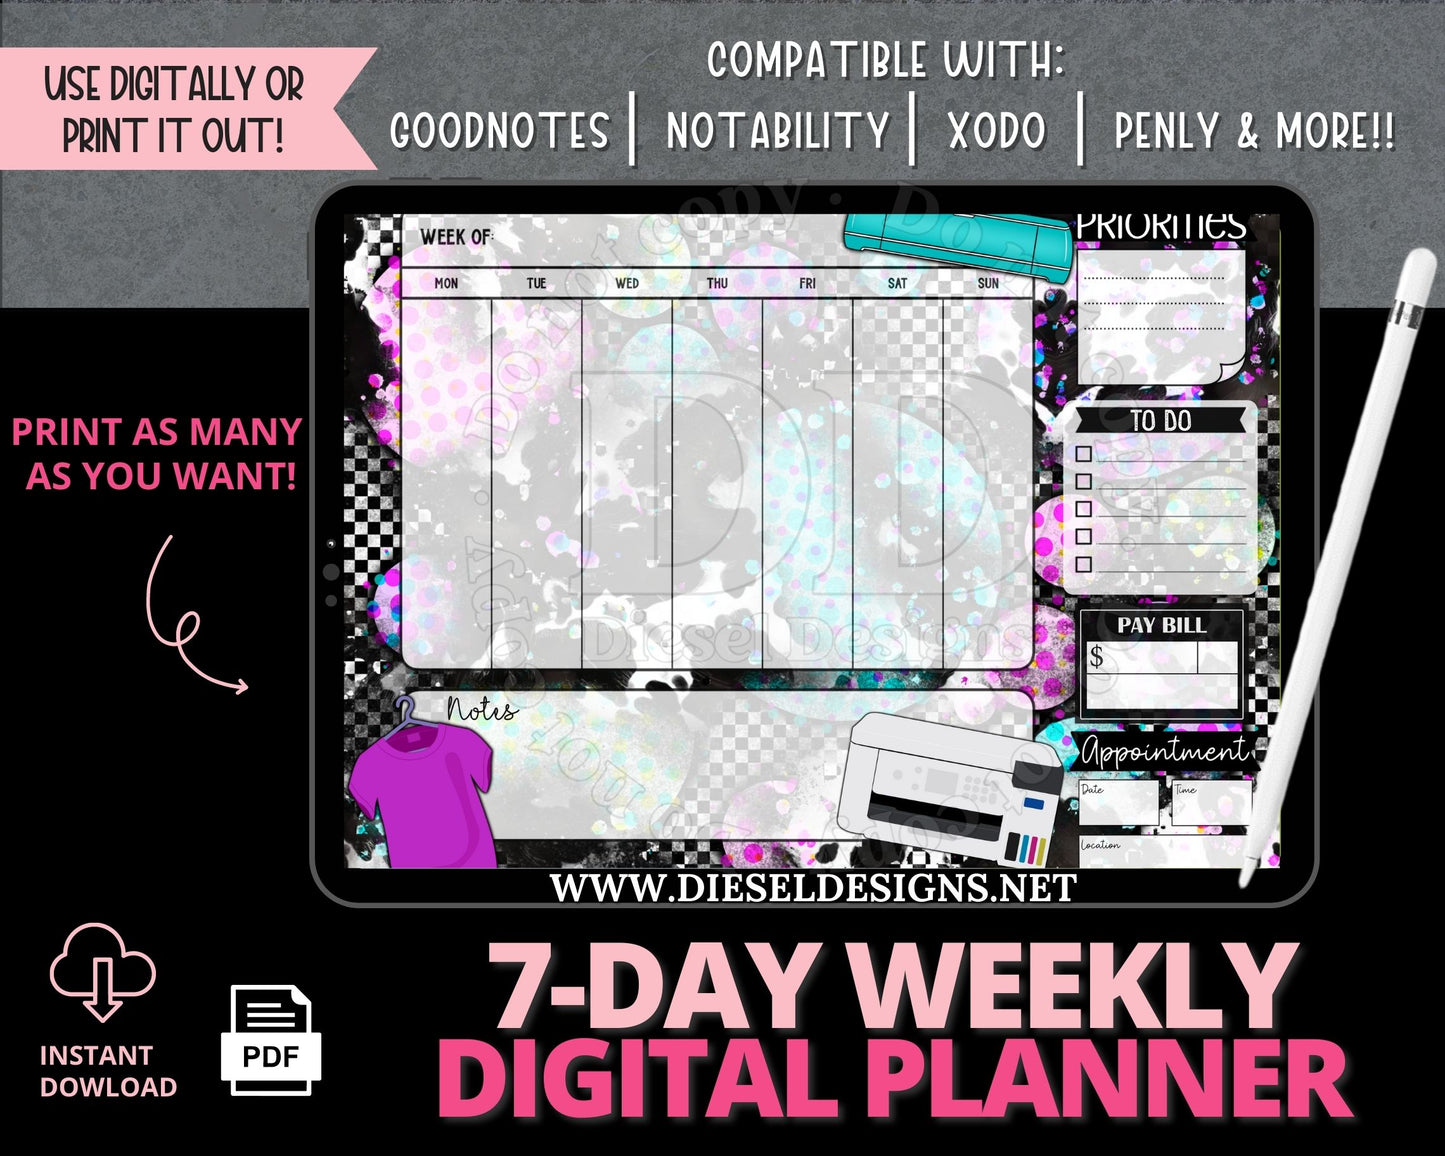 Weekly Planner 1 | 7-Day Digital Planner | 300 DPI | PNG & PDF included